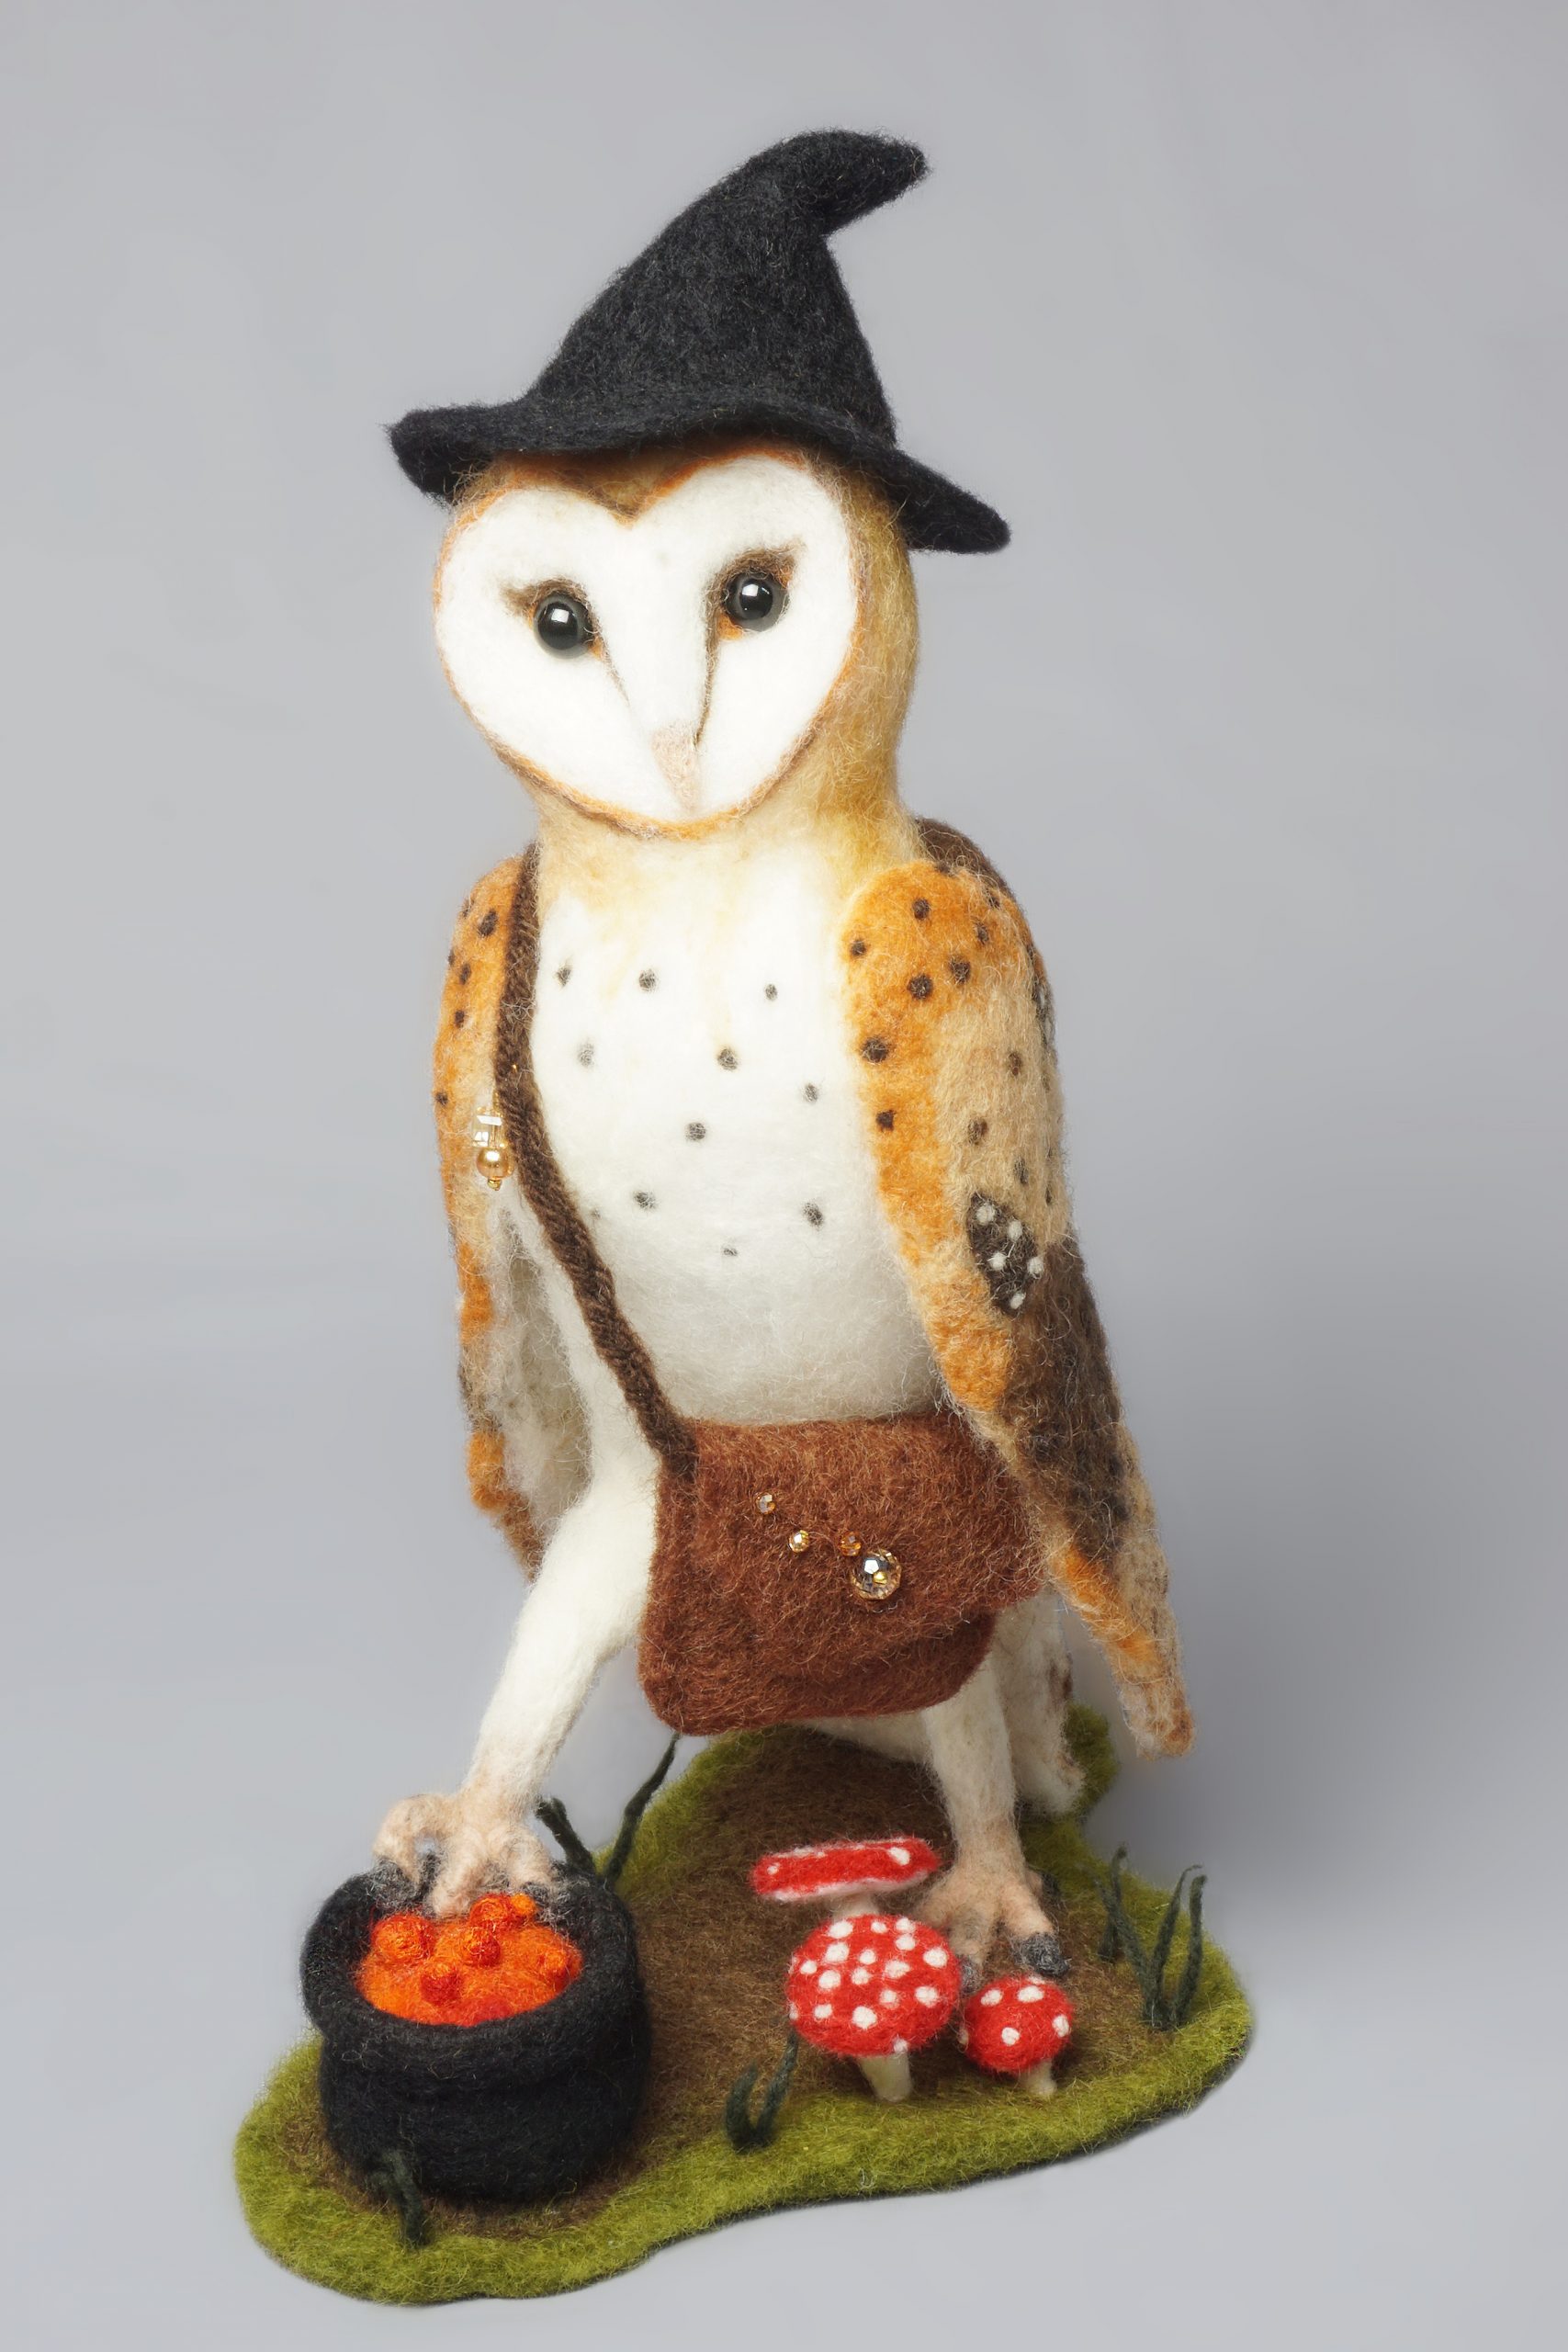 Anthropomorphic owl art doll sculpture. Needle felted wool, one-of-a-kind artist original